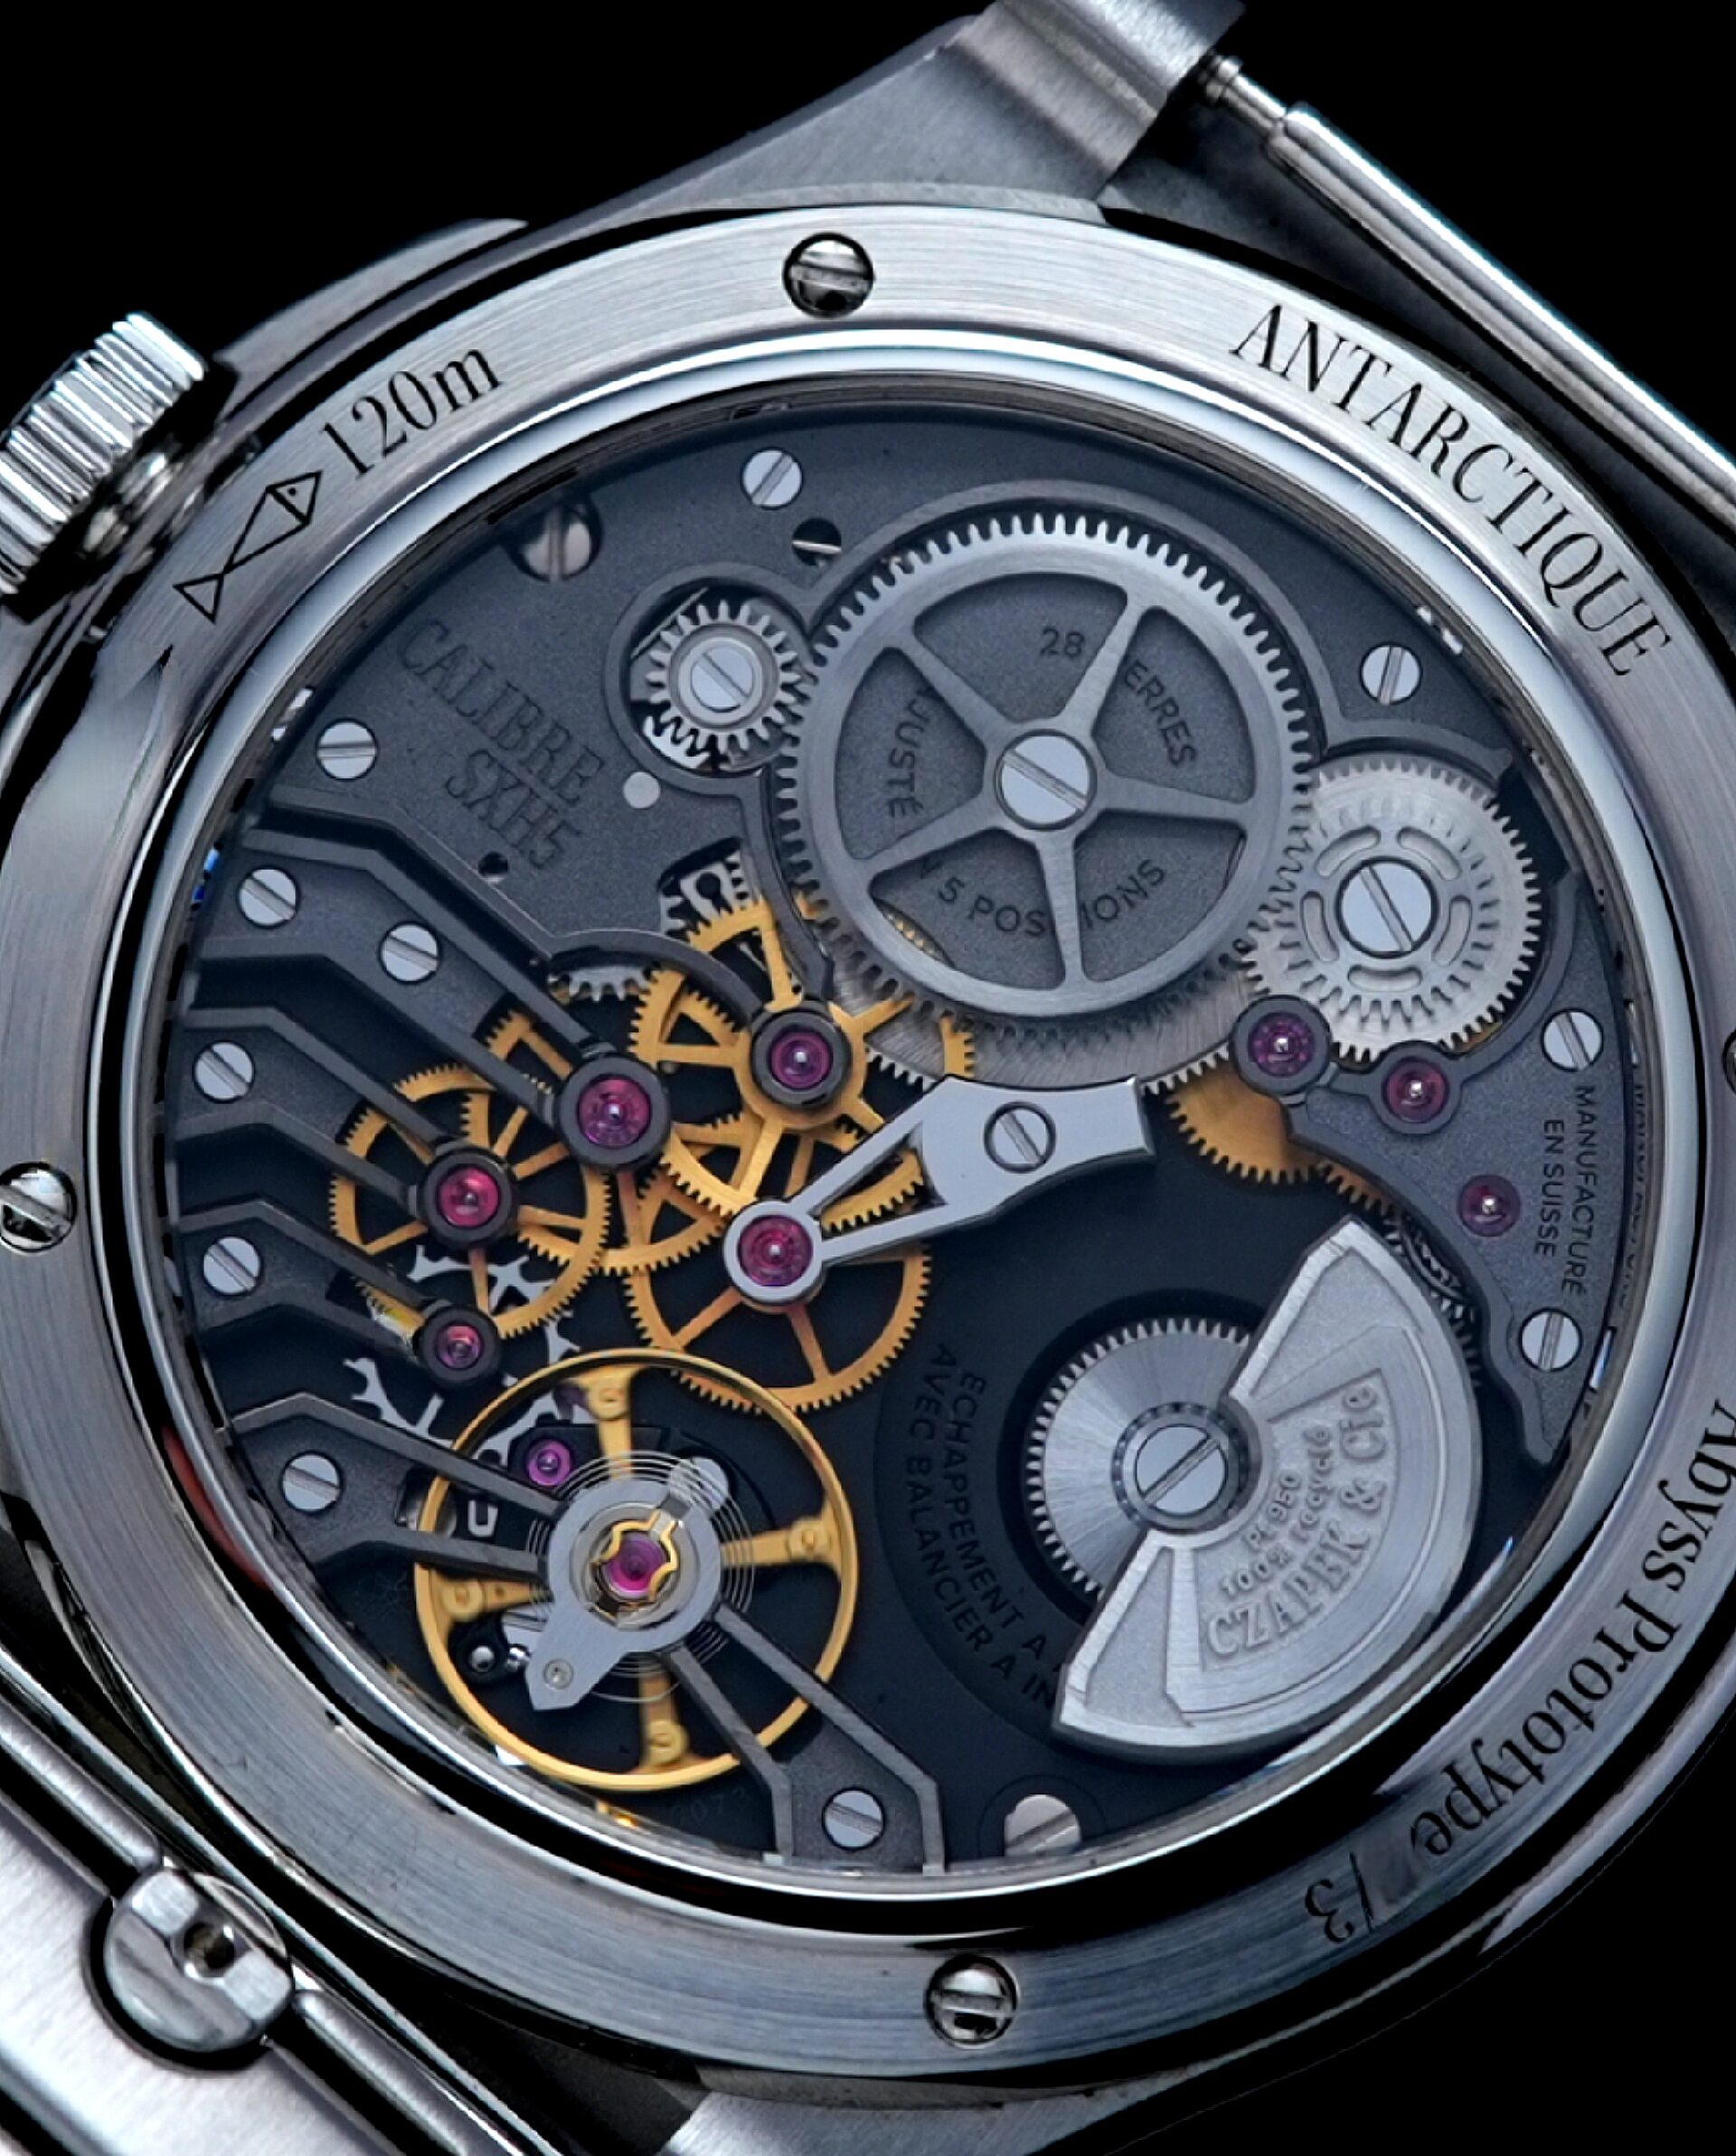 Open caseback of the Antarctique Abyss PROTOTYPE watch.